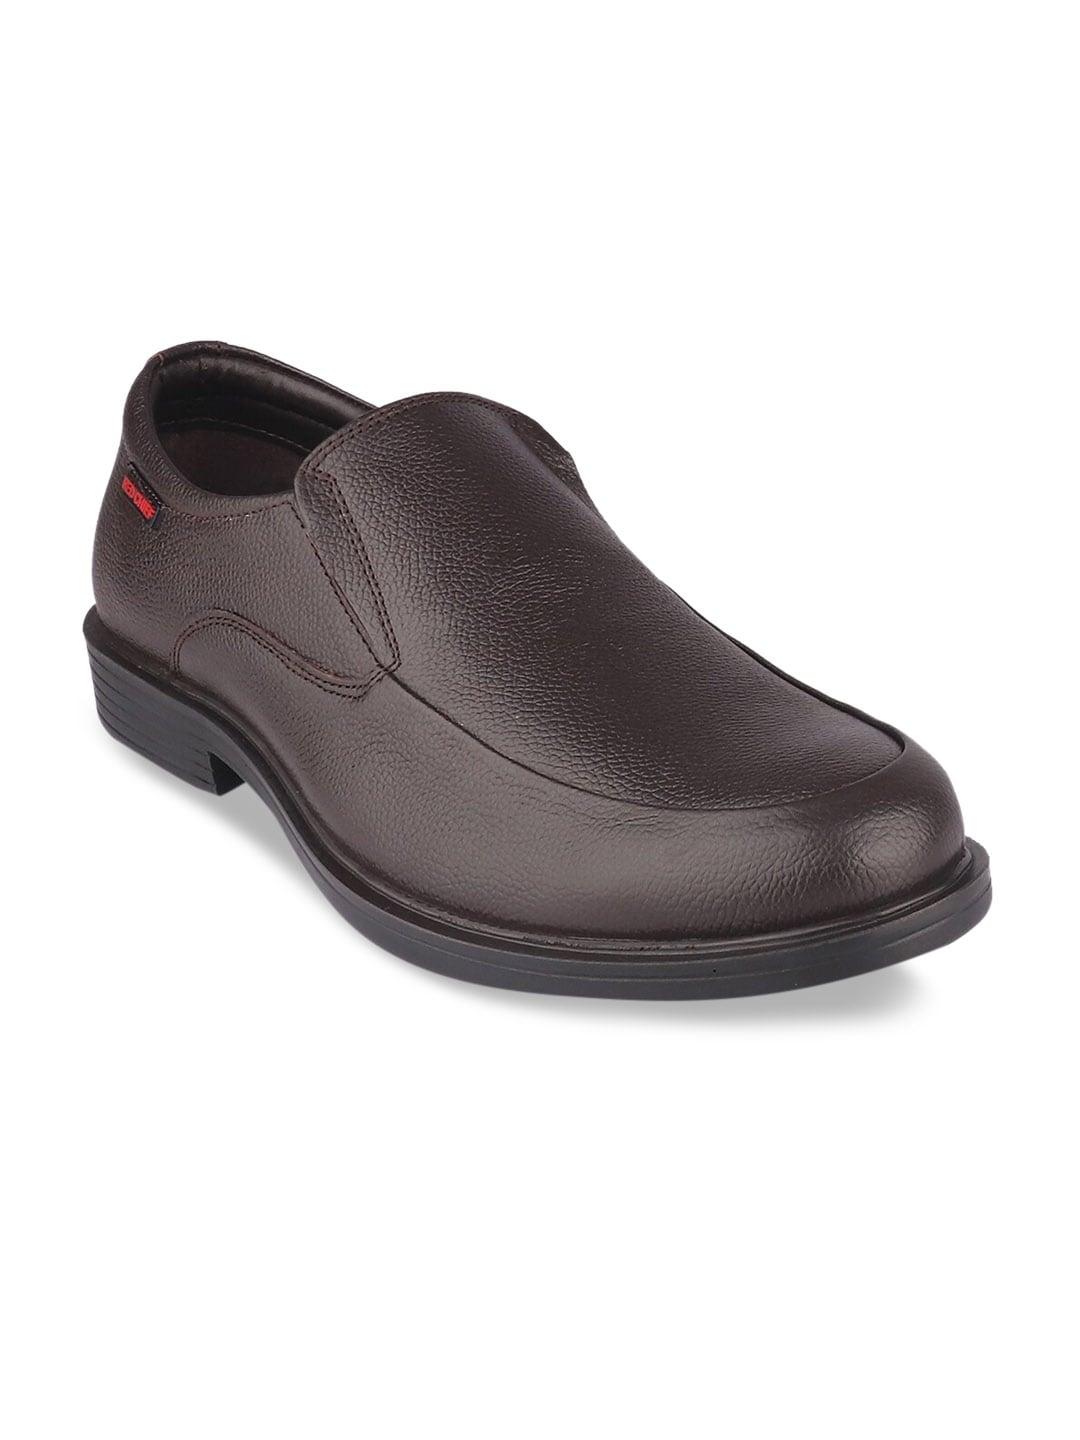 Red Chief Men Formal Slip-On Shoes